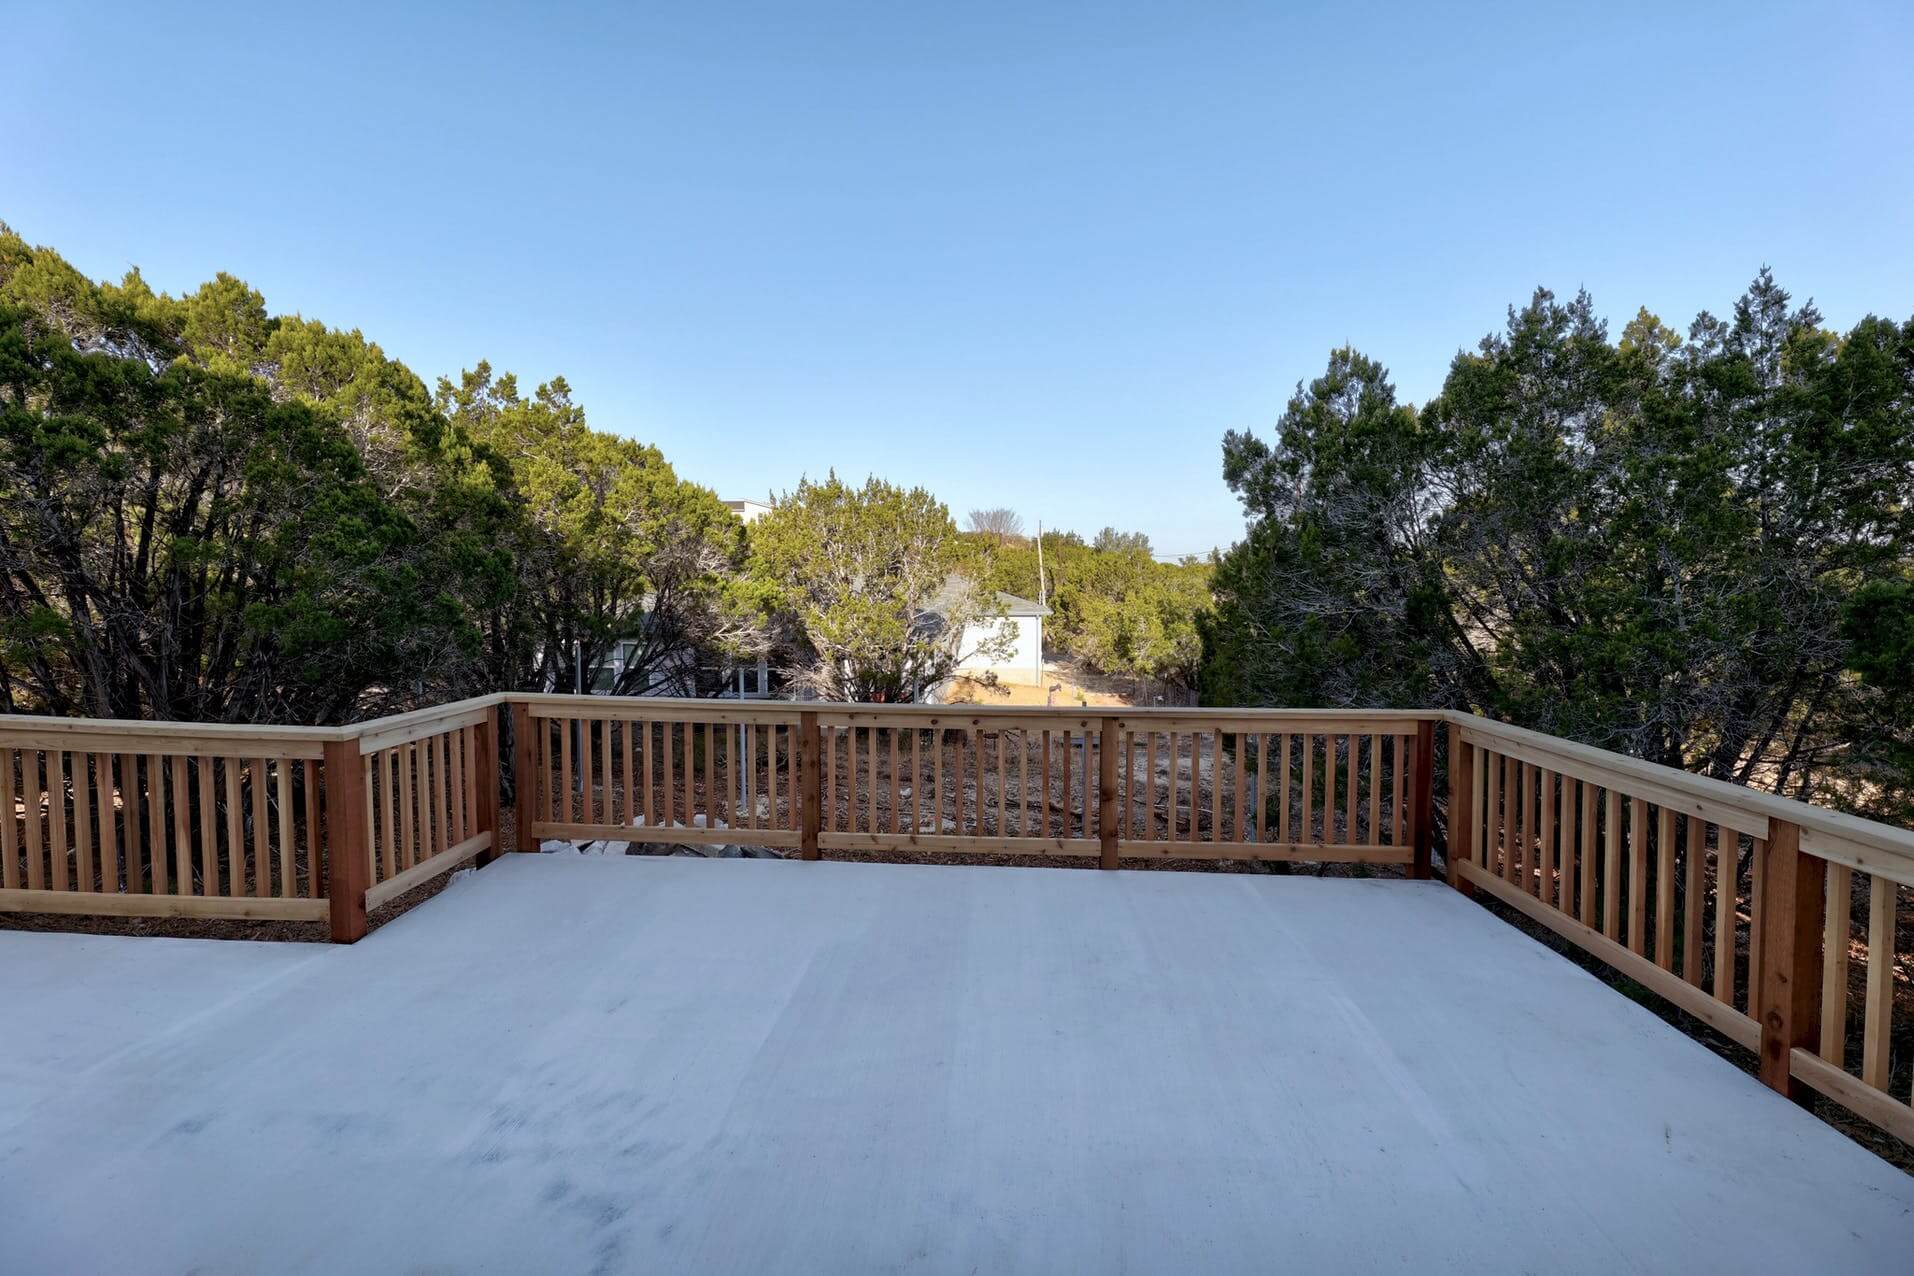 A deck with a wooden railing and a view of a wooded area.